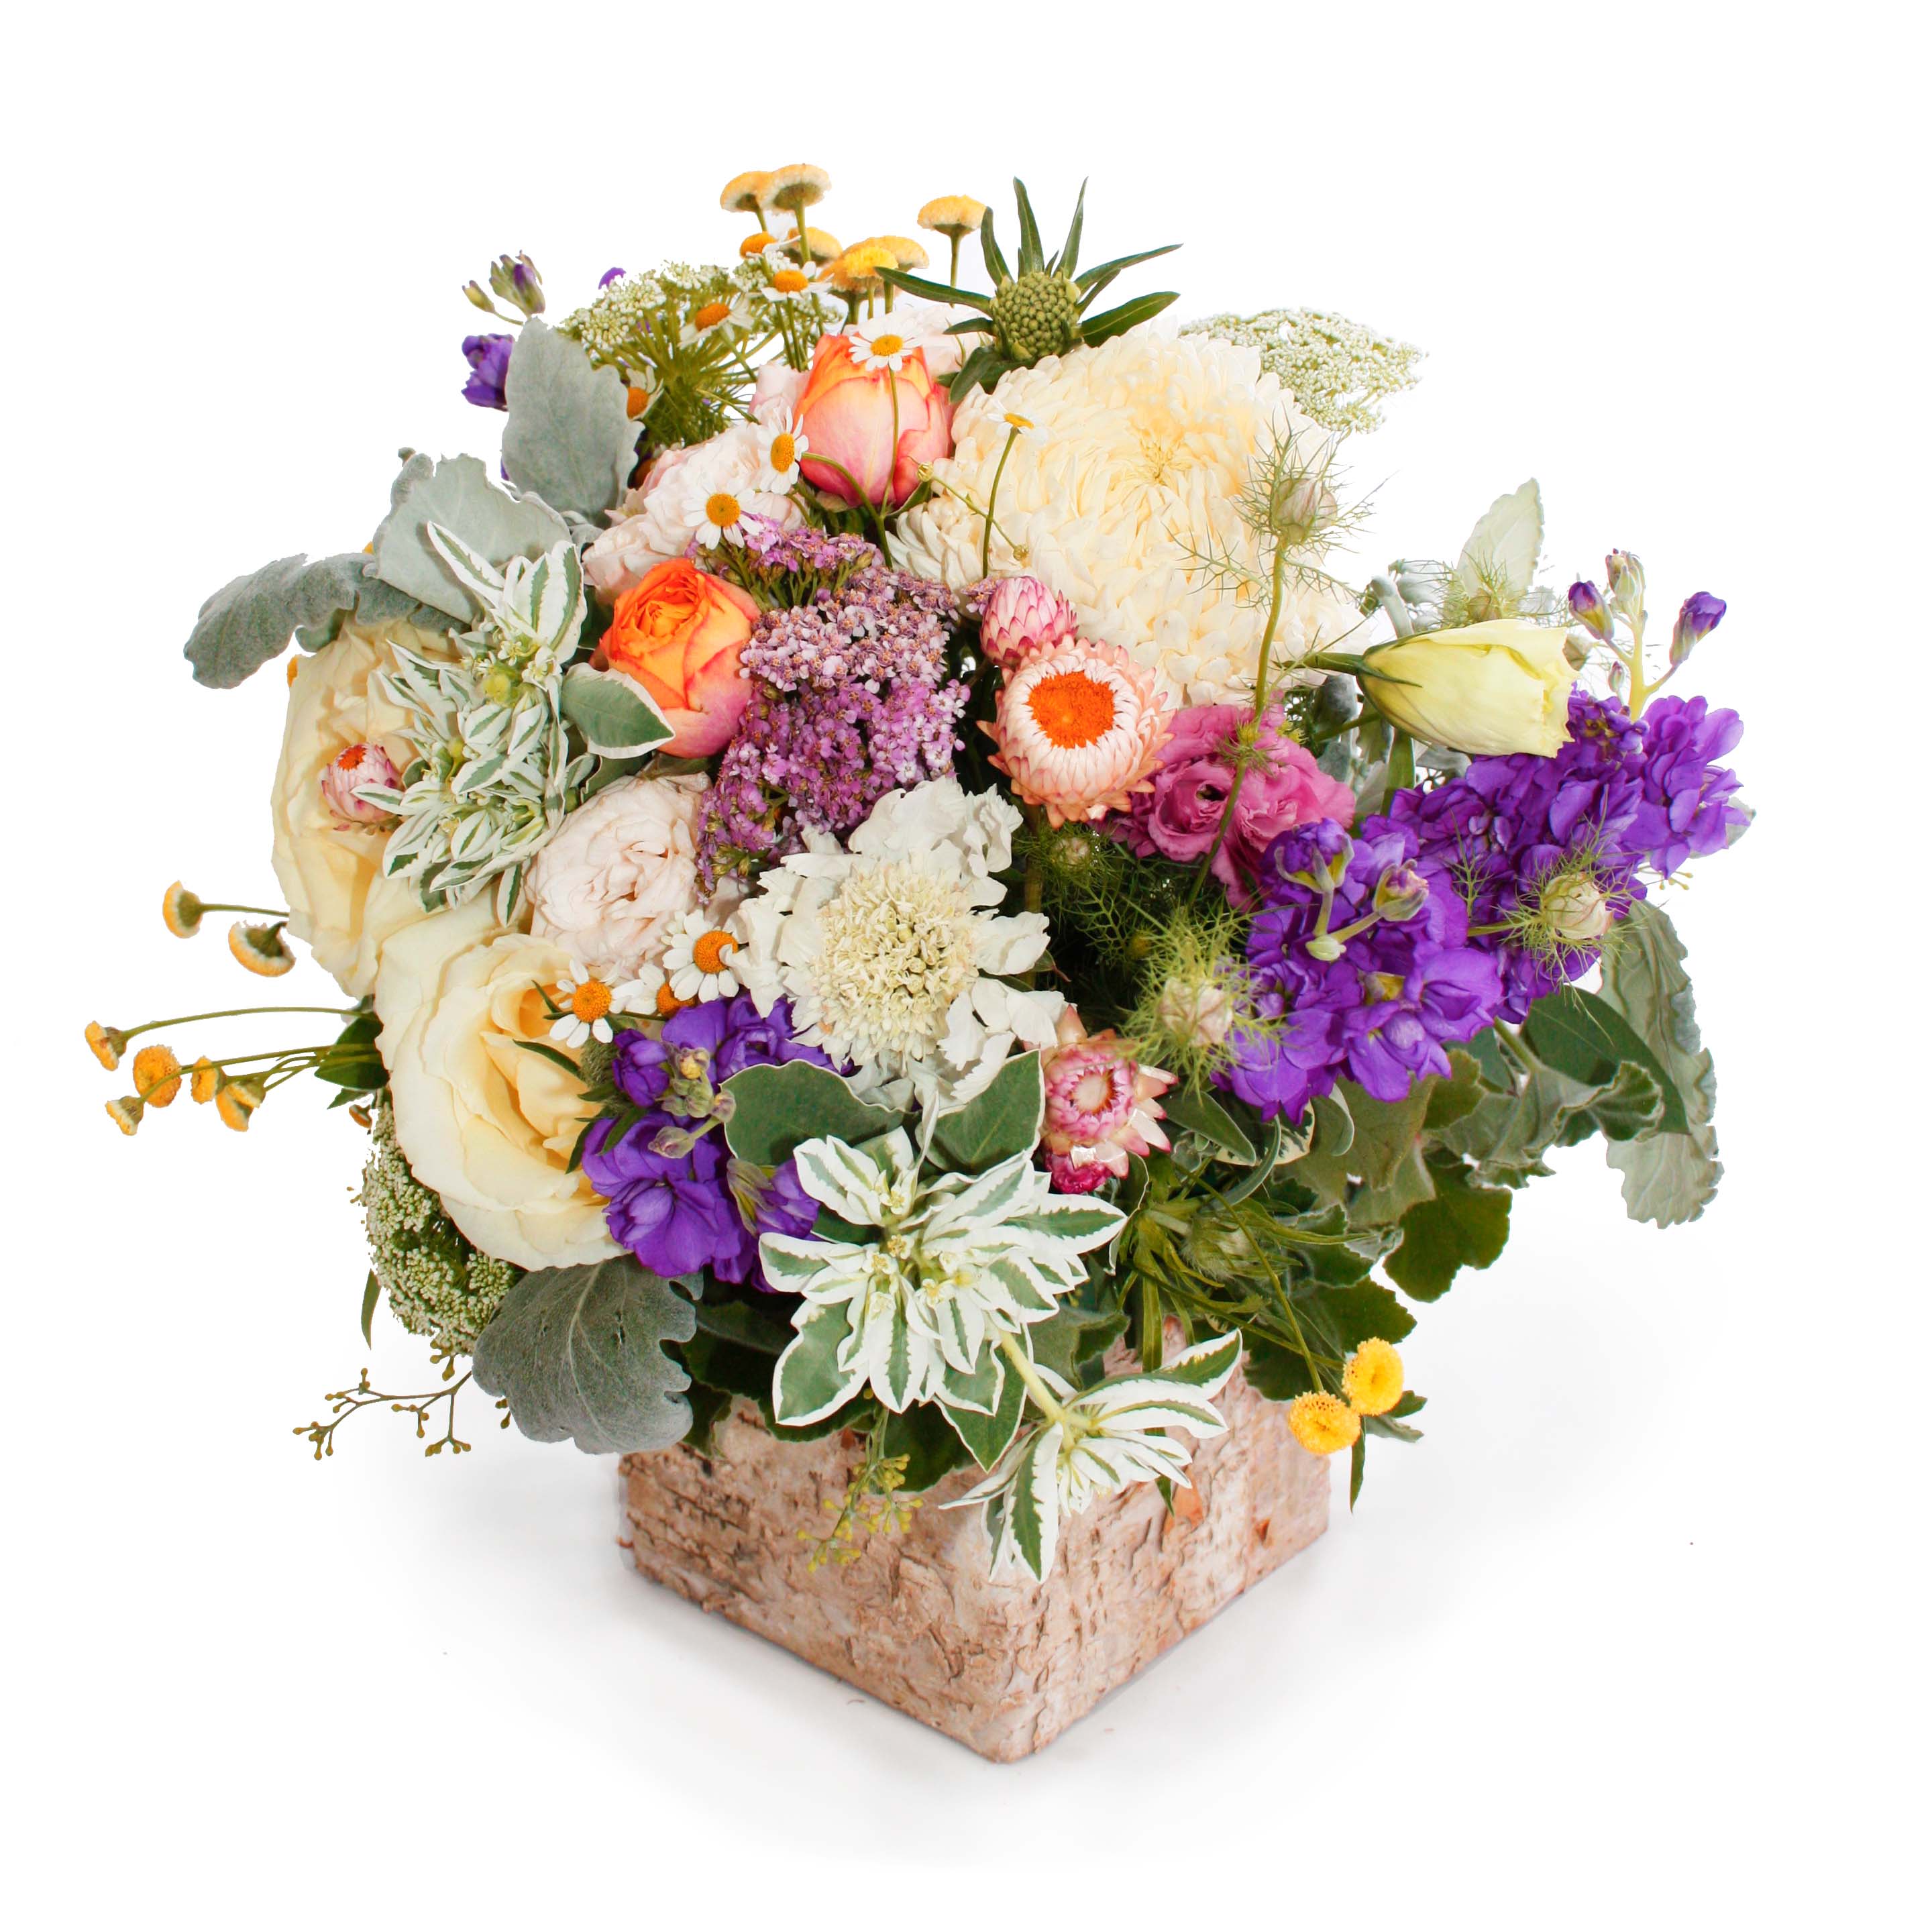 English Garden - Let this showy bouquet take you on a trip to an old English garden. Rows of delightful petals in every shade will pair perfectly with a restful evening in. Make yourself a cup of chamomile tea and allow this arrangement to bring a moment of peace to any occasion with roses, scabiosa, Queen Ann's Lace, stock and more. 